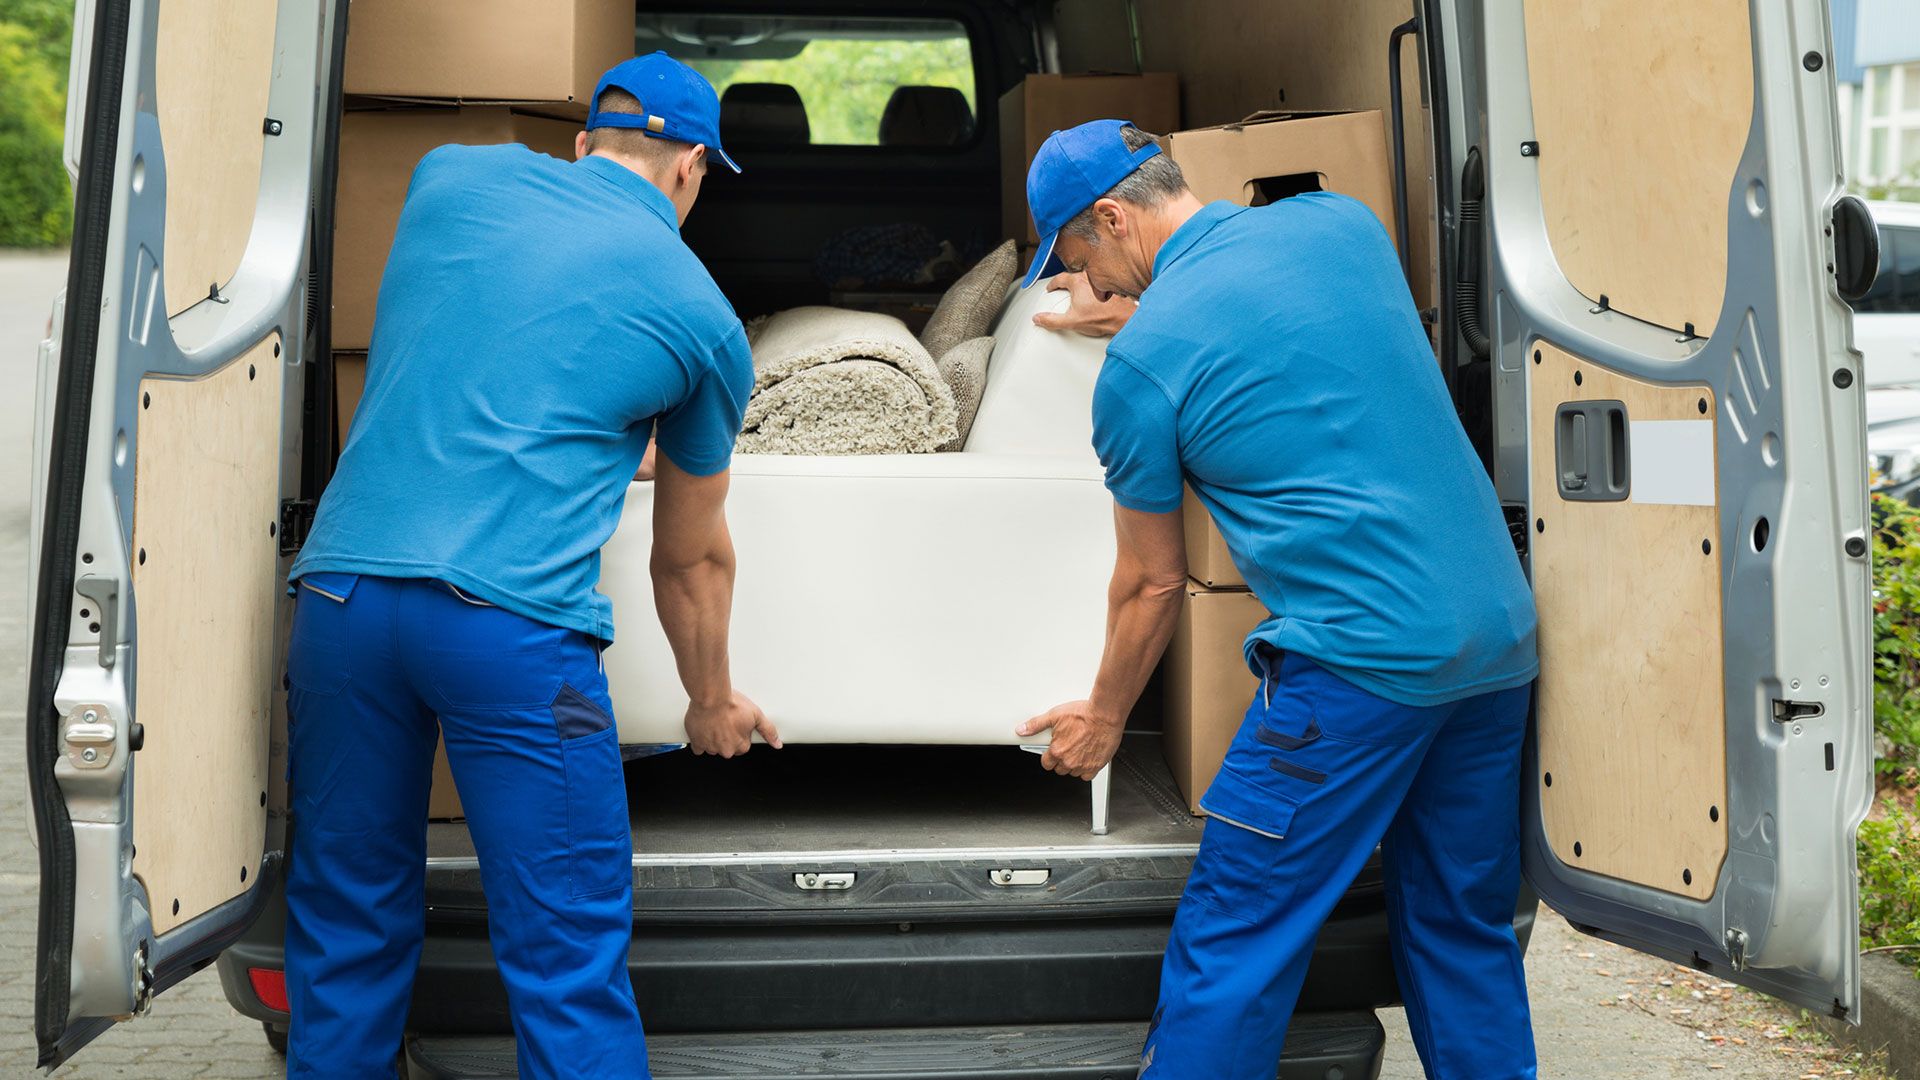 Furniture Delivery Services Deerfield Beach FL